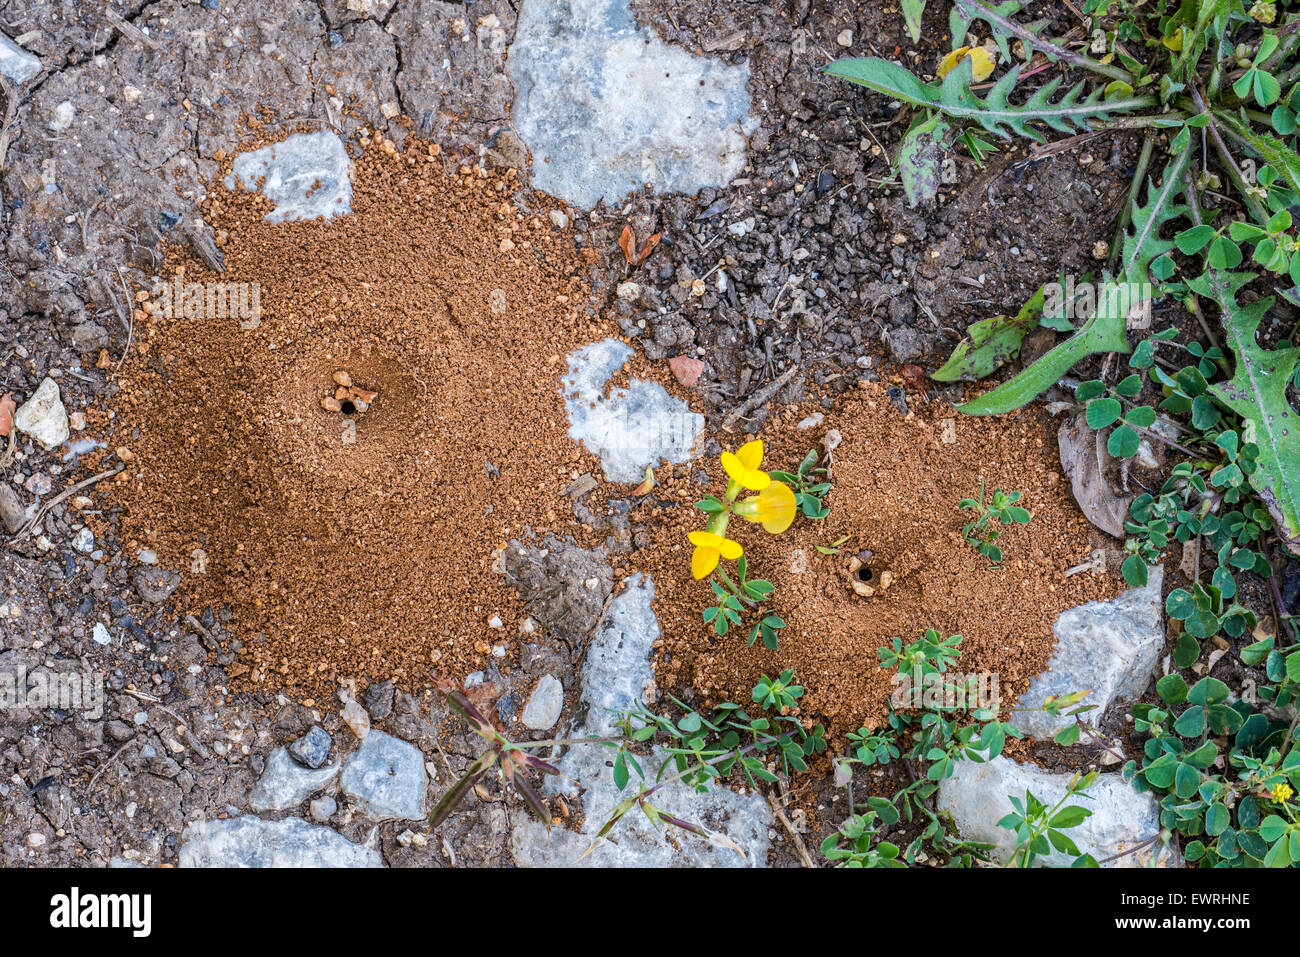 Cone shaped sand pit traps of antlions / ant lions (Myrmeleontidae) Stock Photo